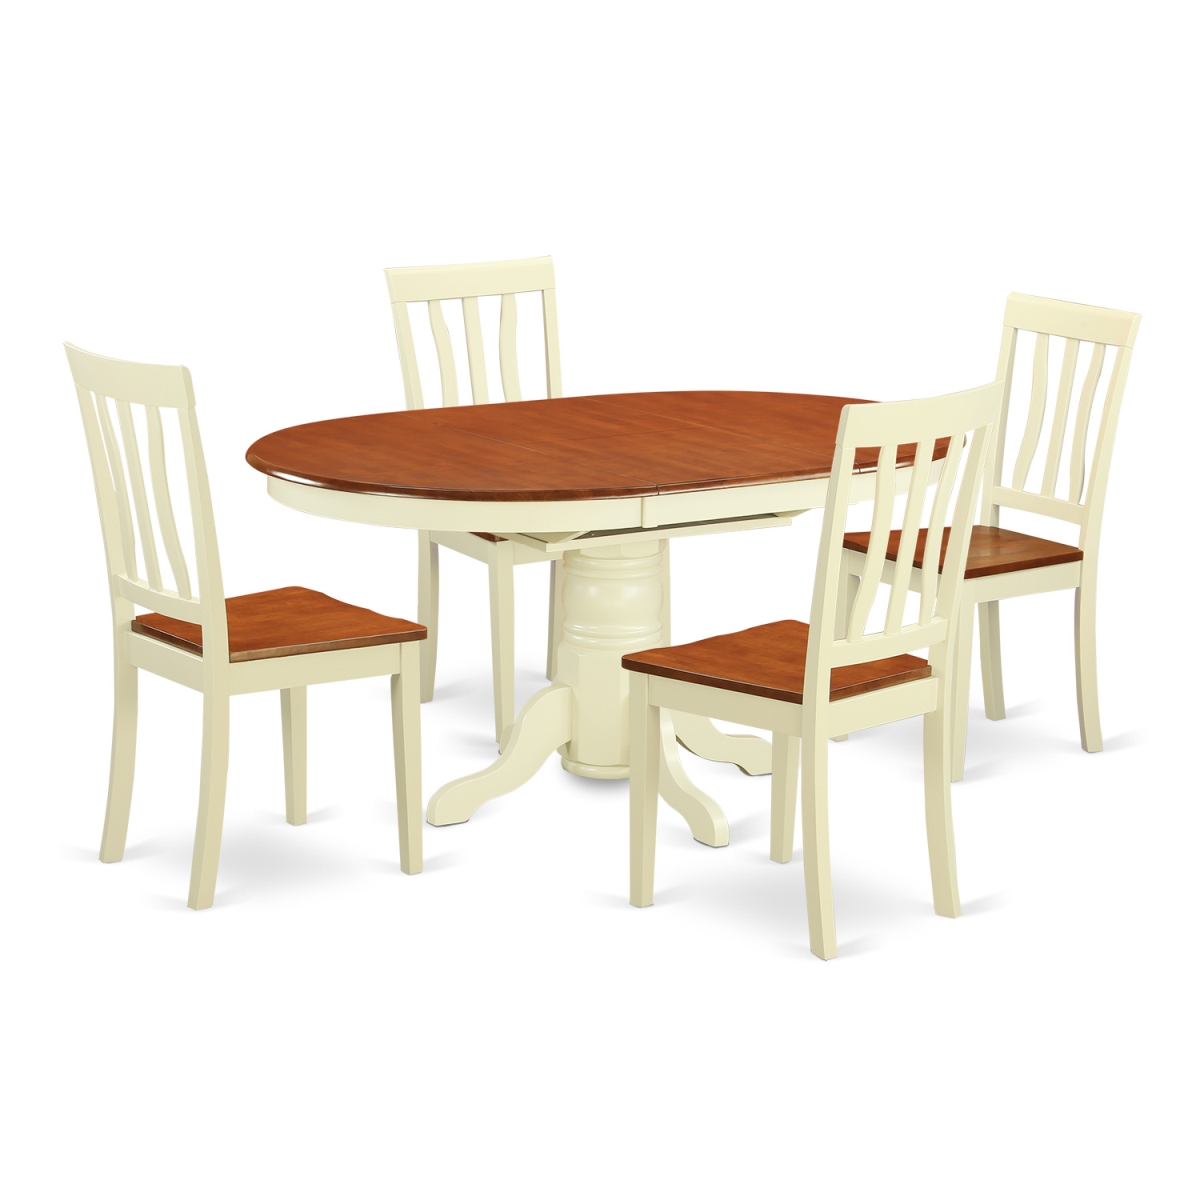 Picture of East West Furniture AVAT5-WHI-W Table & Chair Set with 4 Dining Table & 4 Chairs, Buttermilk & Cherry - 5 Piece